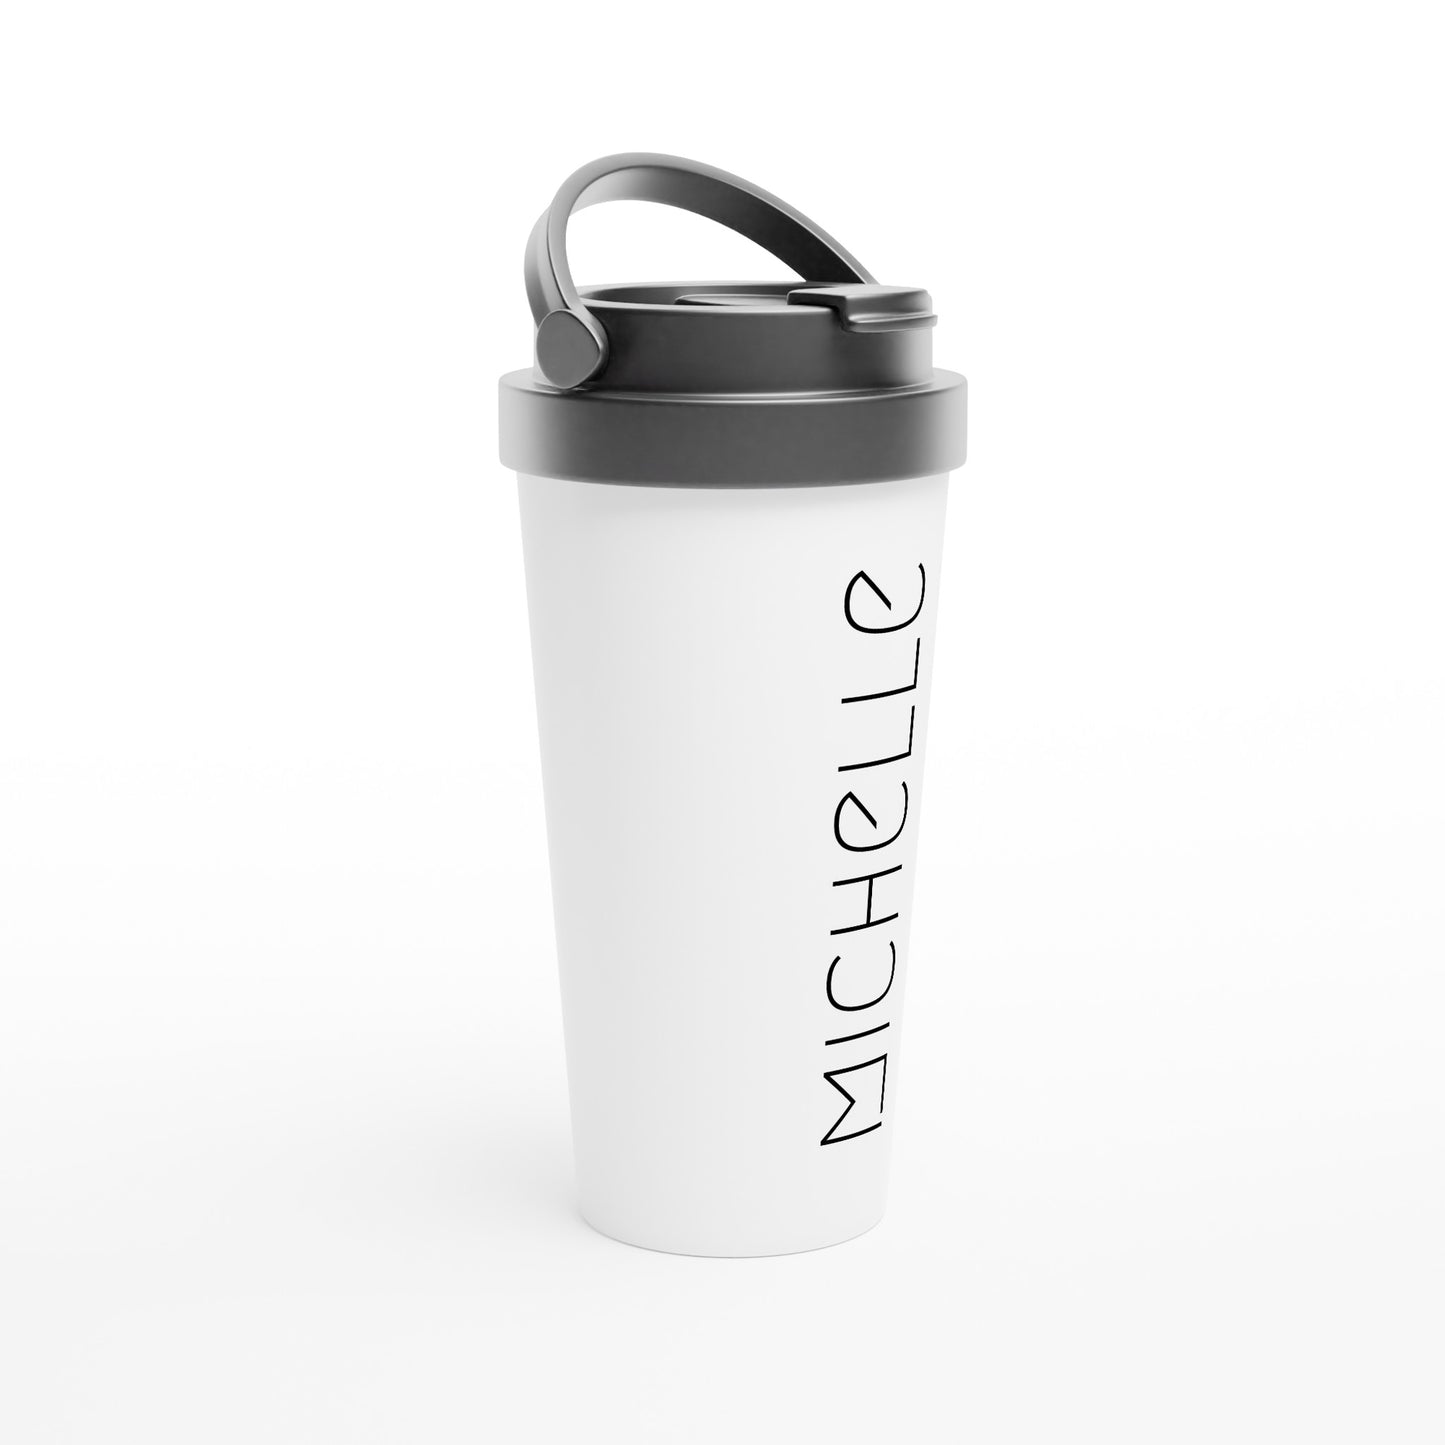 Personalise - Your Name - White 15oz Stainless Steel Travel Mug Personalised Travel Mug customise personalise